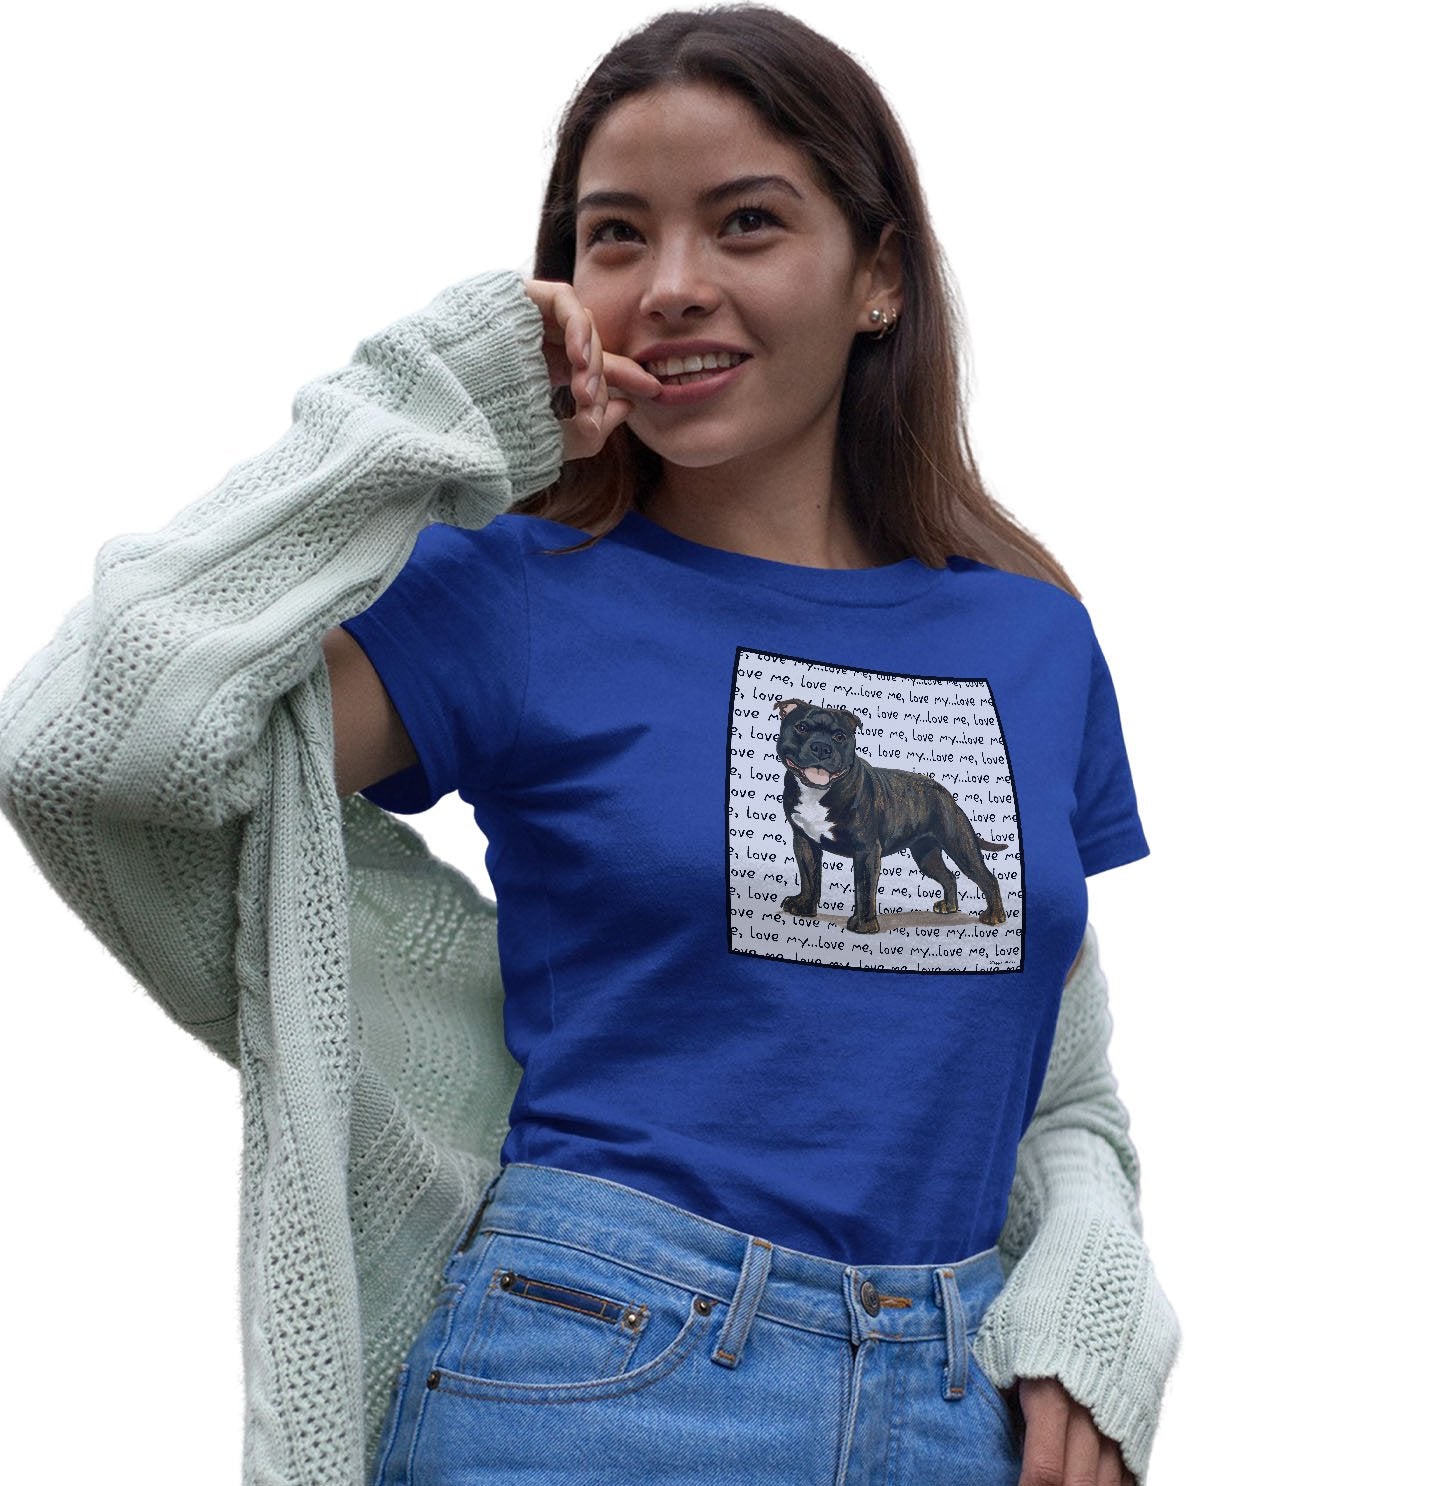 Brindle English Staffy Love Text - Women's Fitted T-Shirt